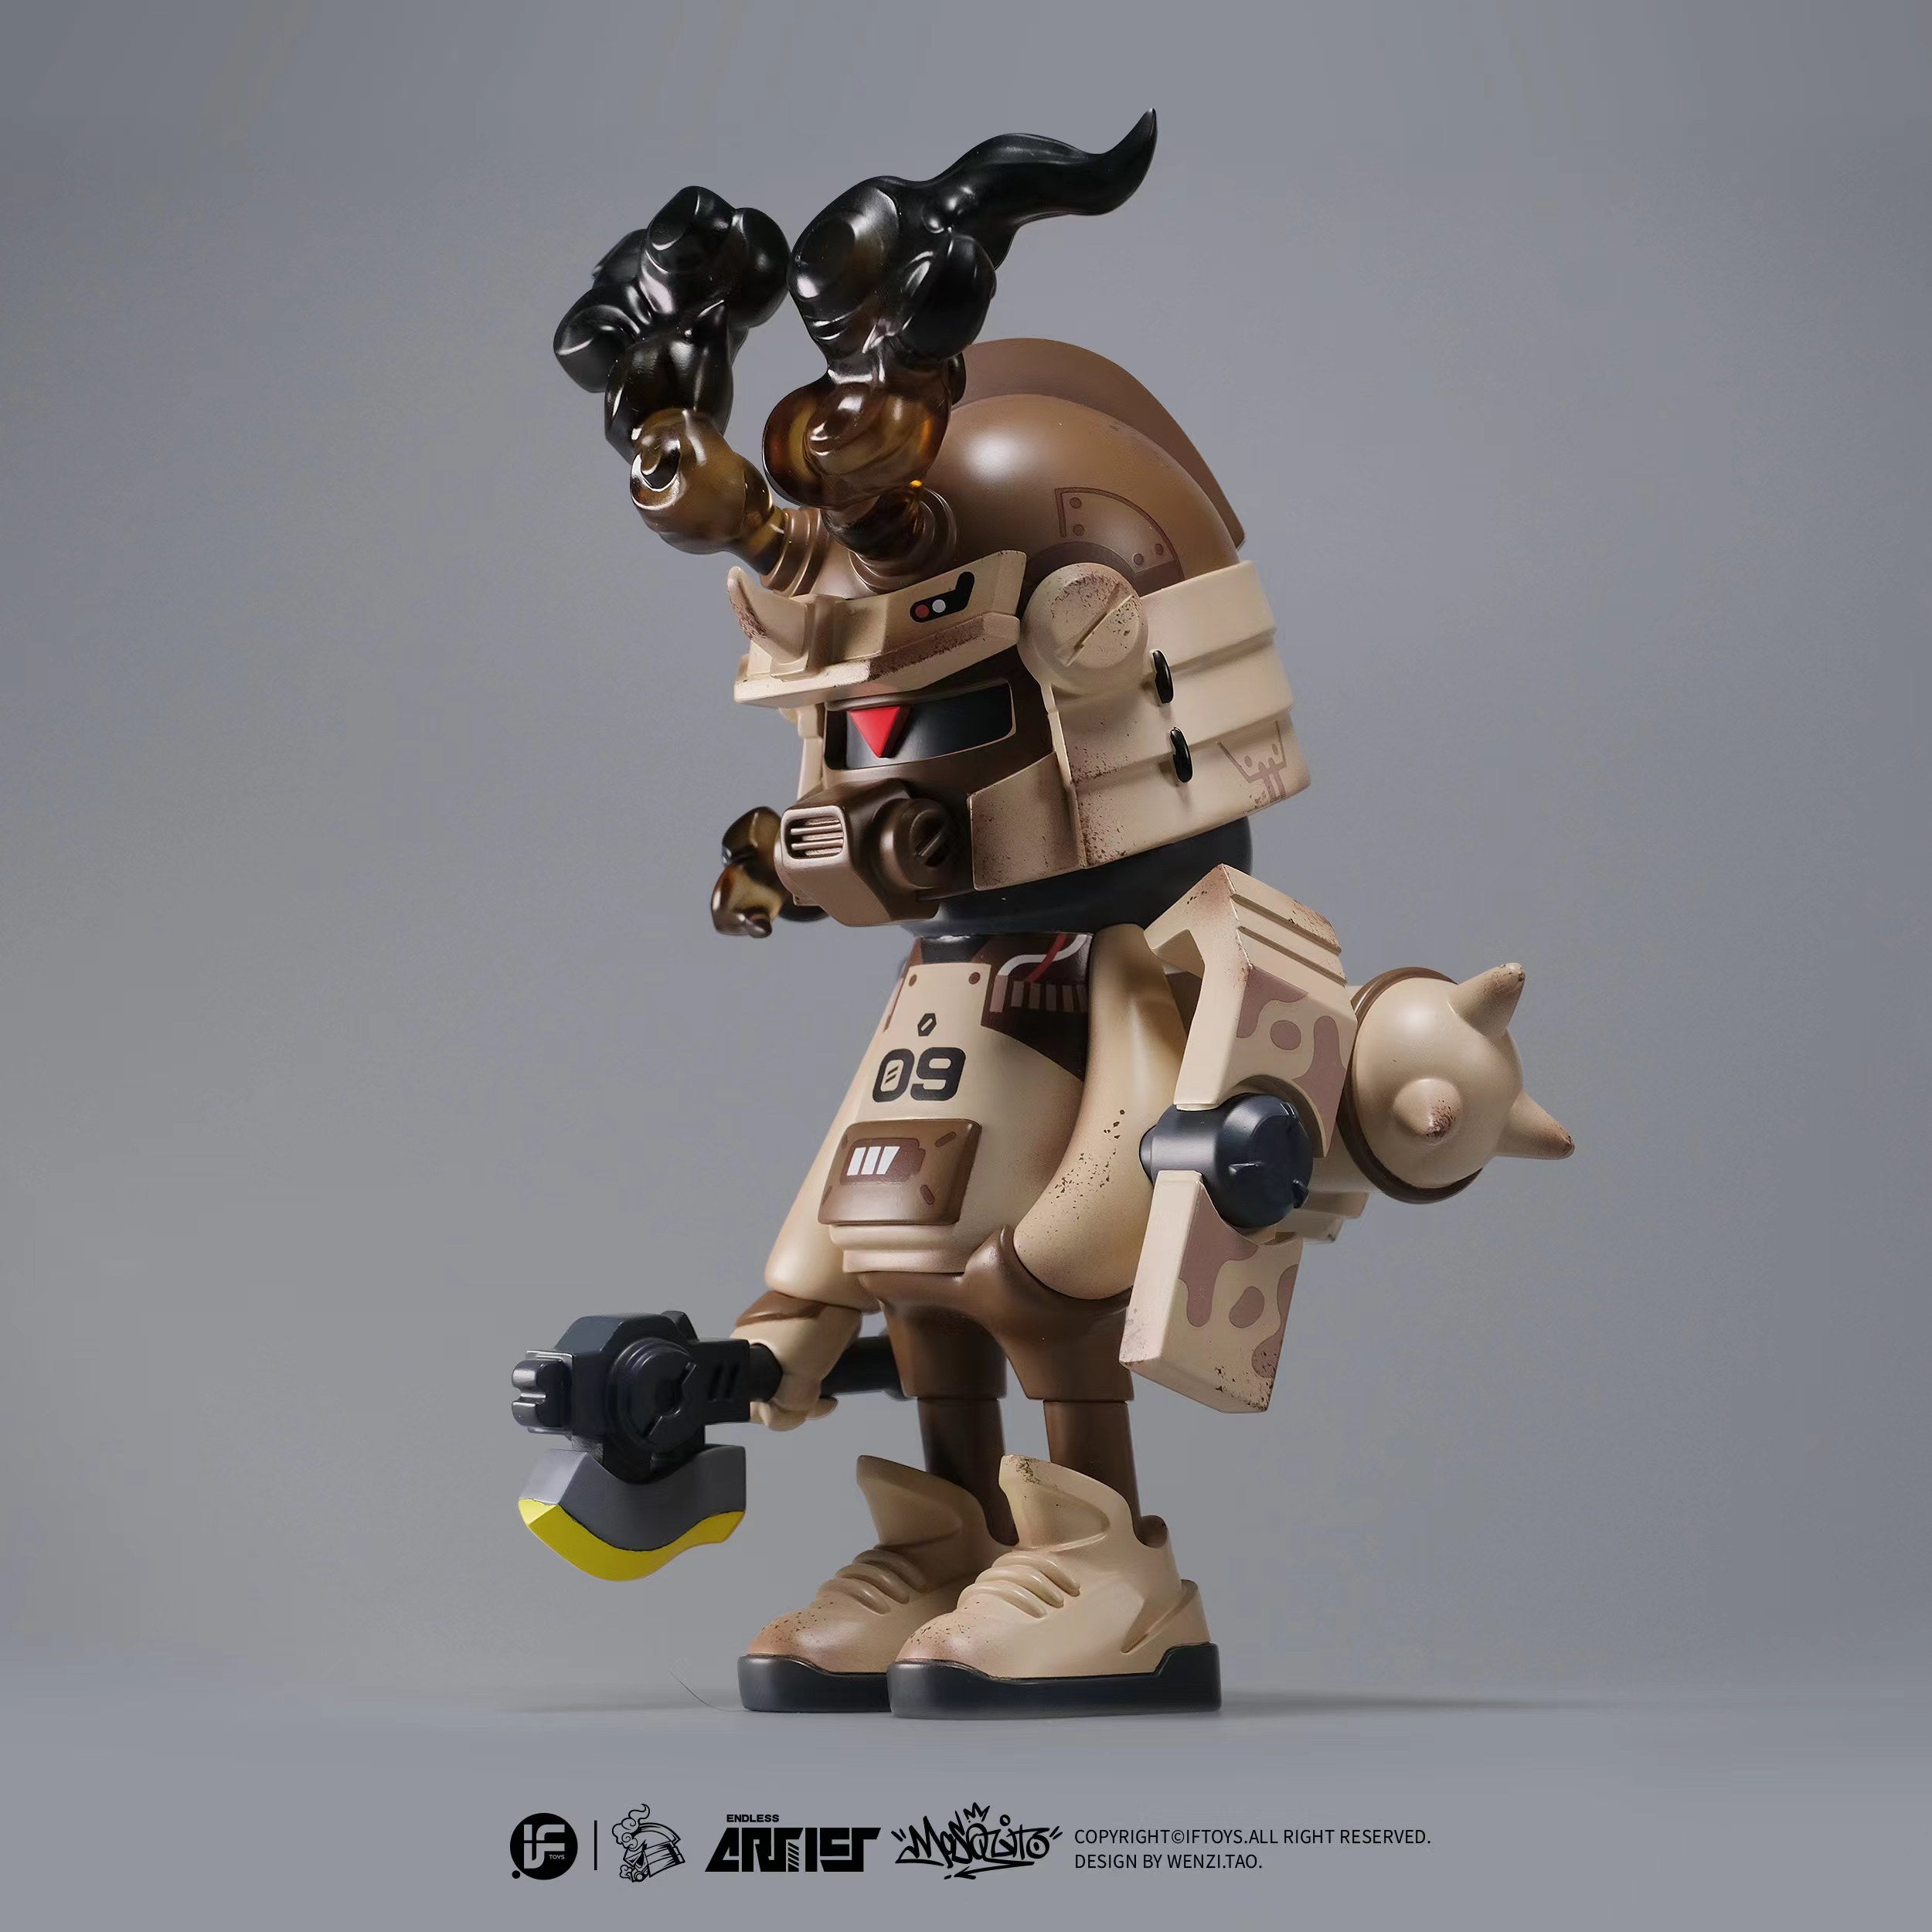 A 6.1-inch tall toy robot figurine titled ENDLESS SERIES -- Scorpion Force 09 By Wenzi.Tao. Limited edition of 198, made of PU Resin. Characteristic of Strangecat Toys' blind box and art toy store.